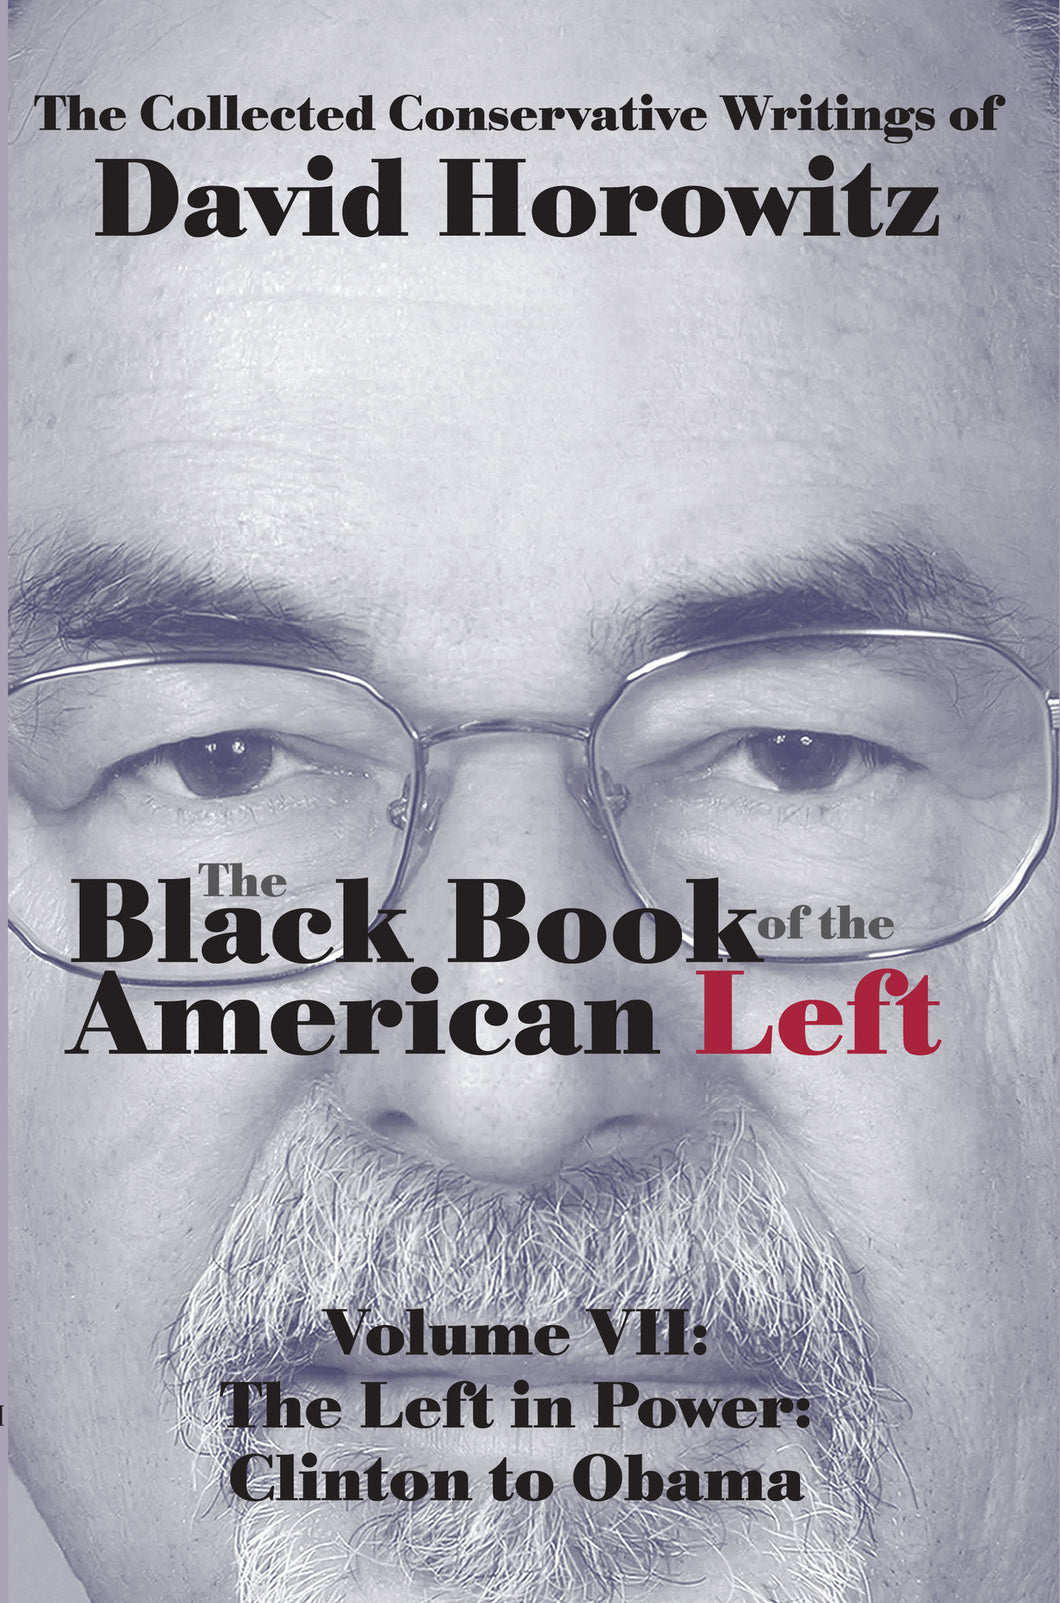 The Black Book of the American Left Volume VII: The Left in Power: Clinton to Obama